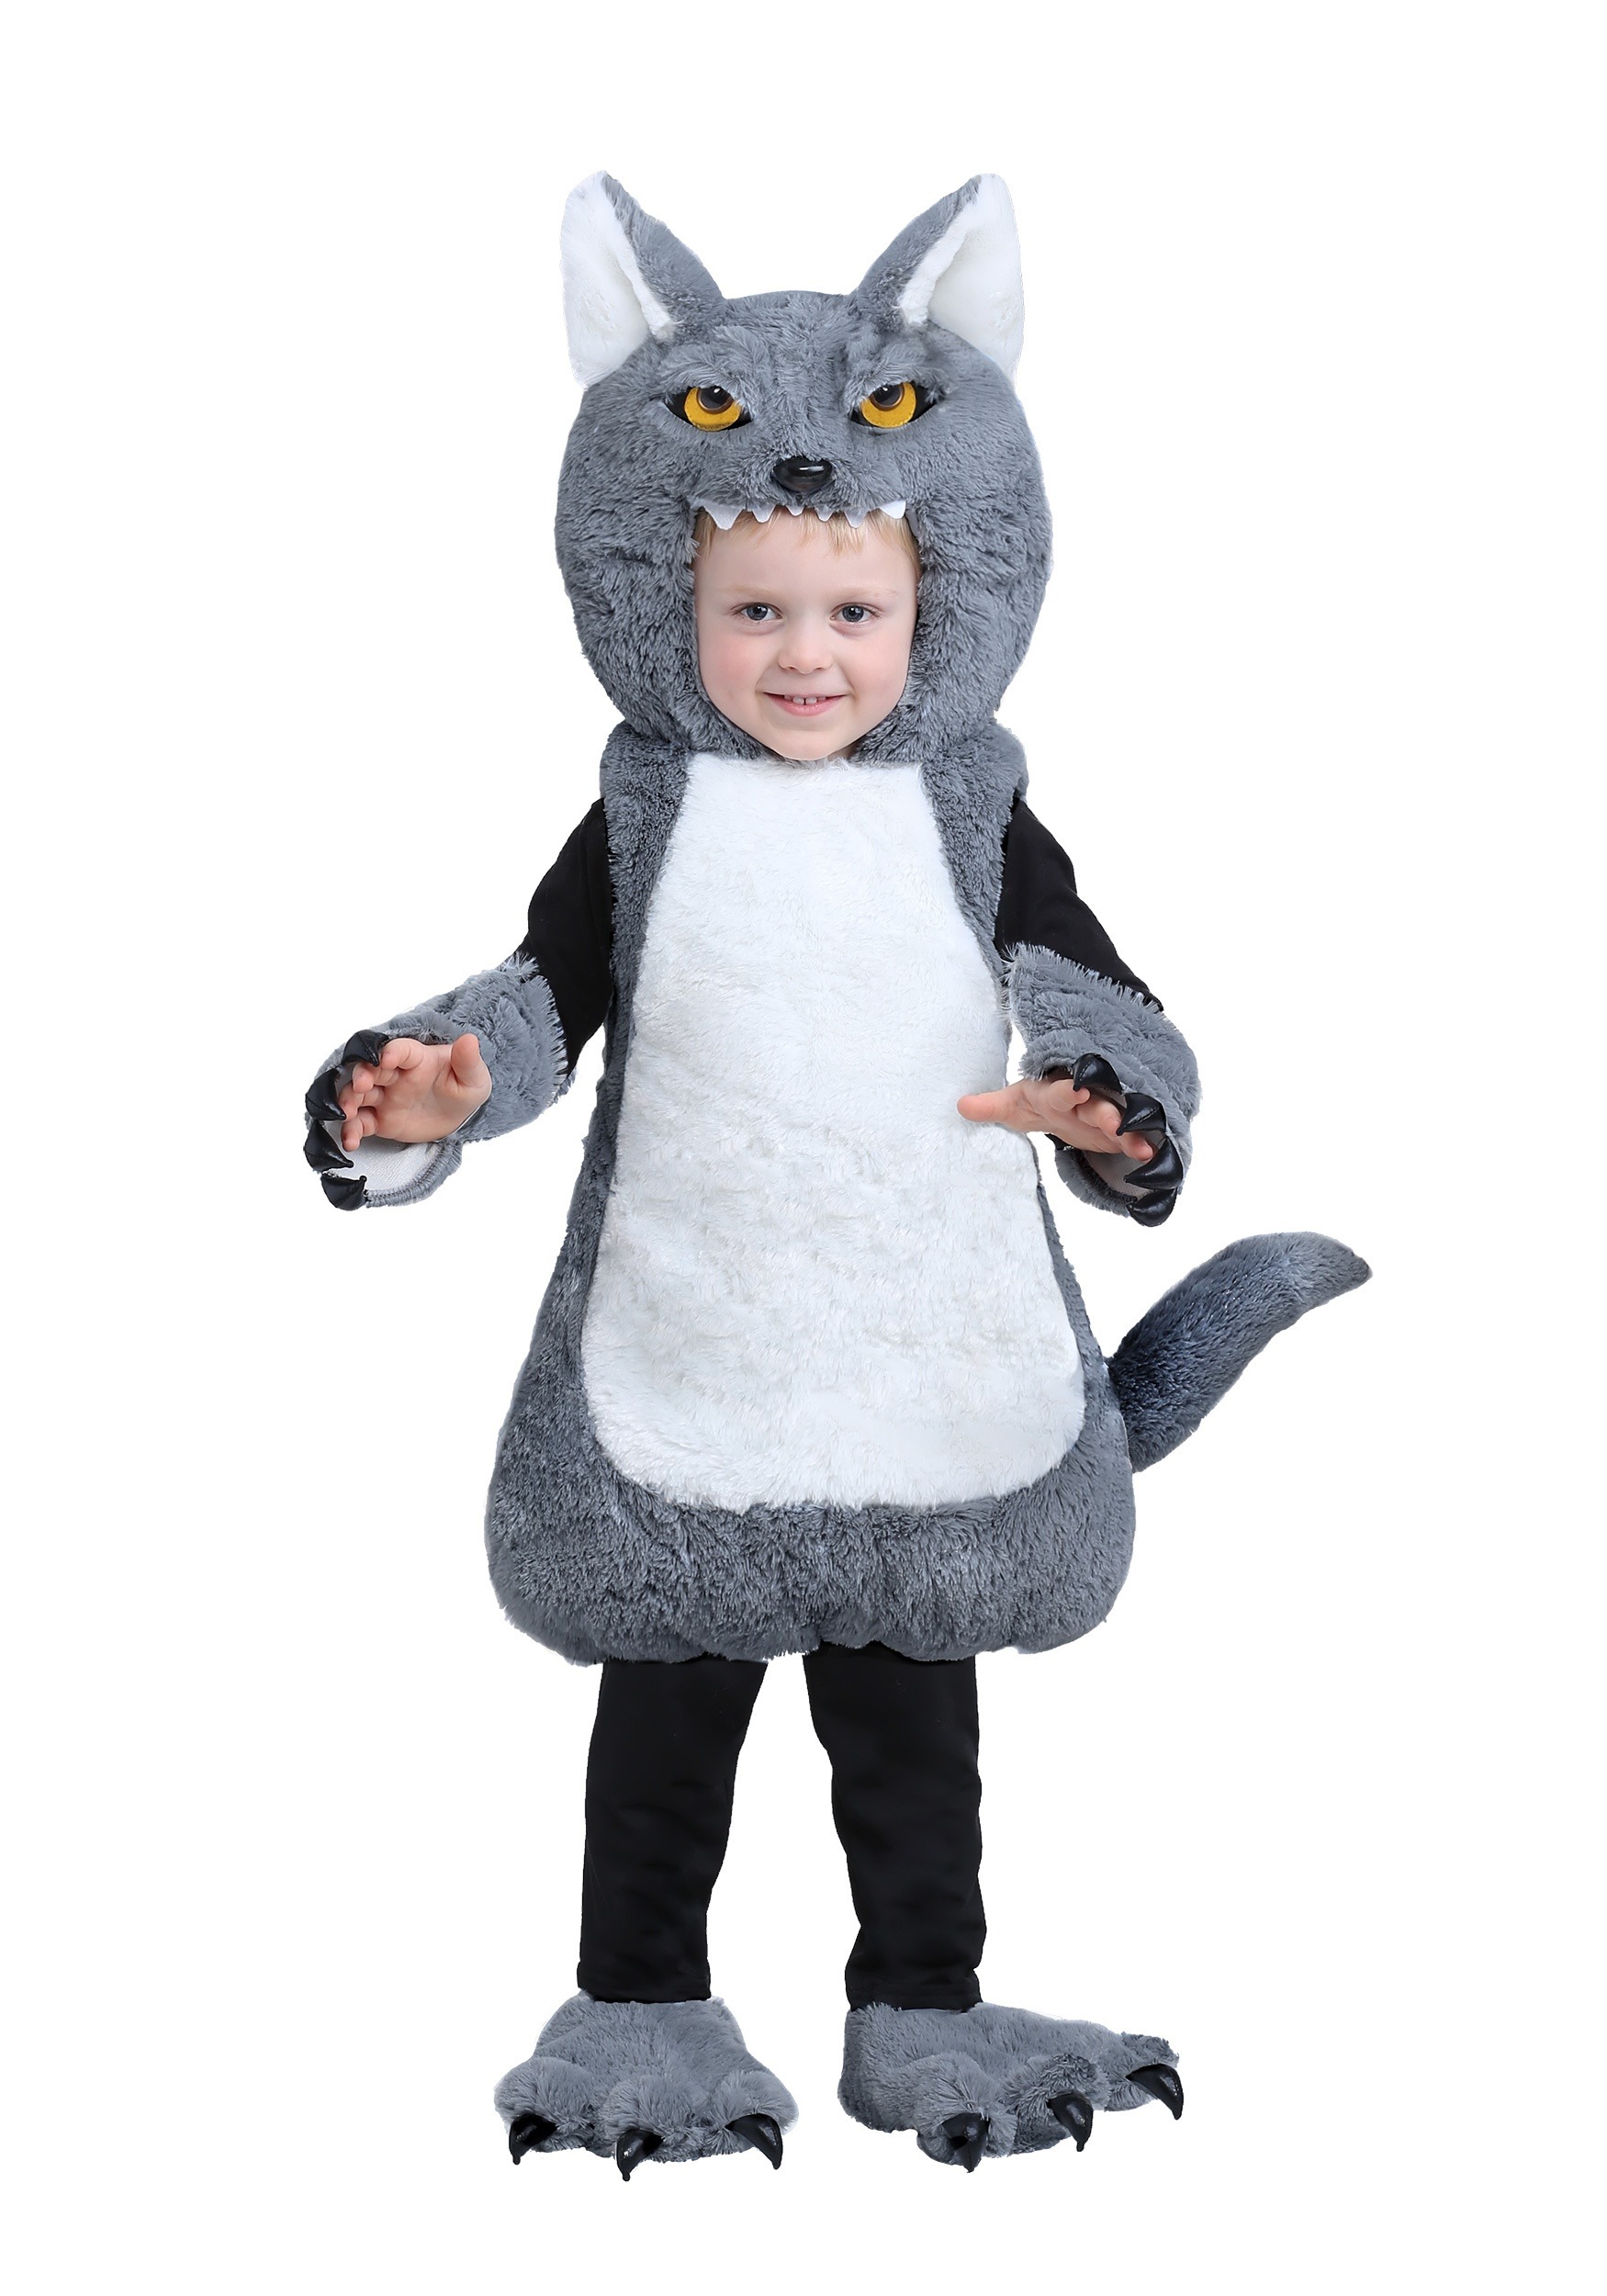 Photos - Fancy Dress WOLF FUN Costumes  Bubble Infant/Toddler Costume Black/Gray FUN2977TD 